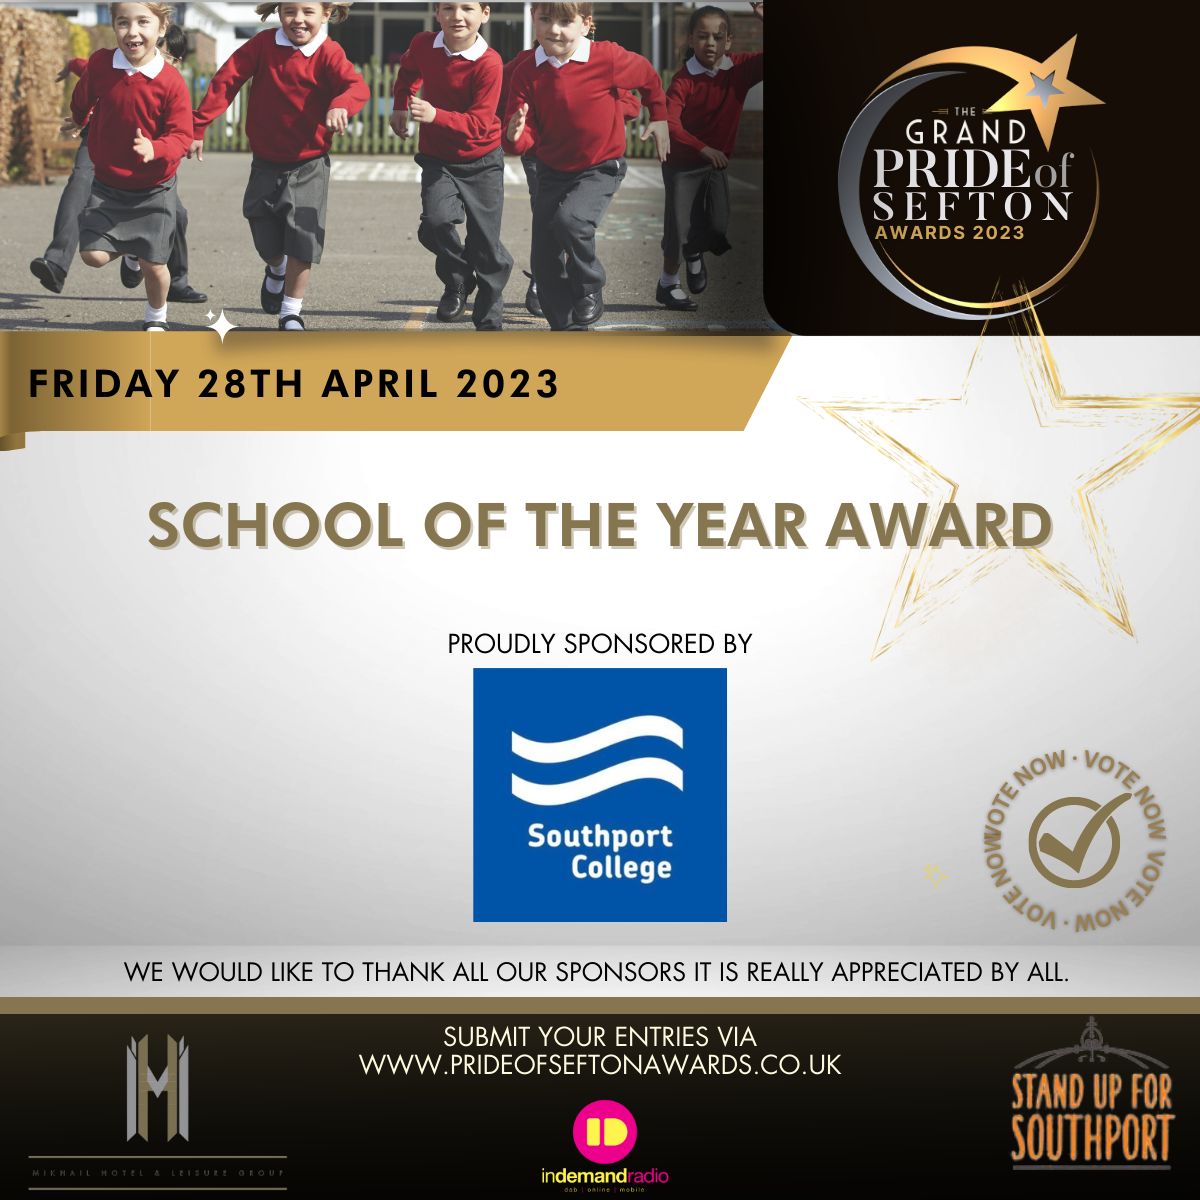 Southport College is sponsoring the School Of The Year Award at the 2023 Pride Of Sefton Awards